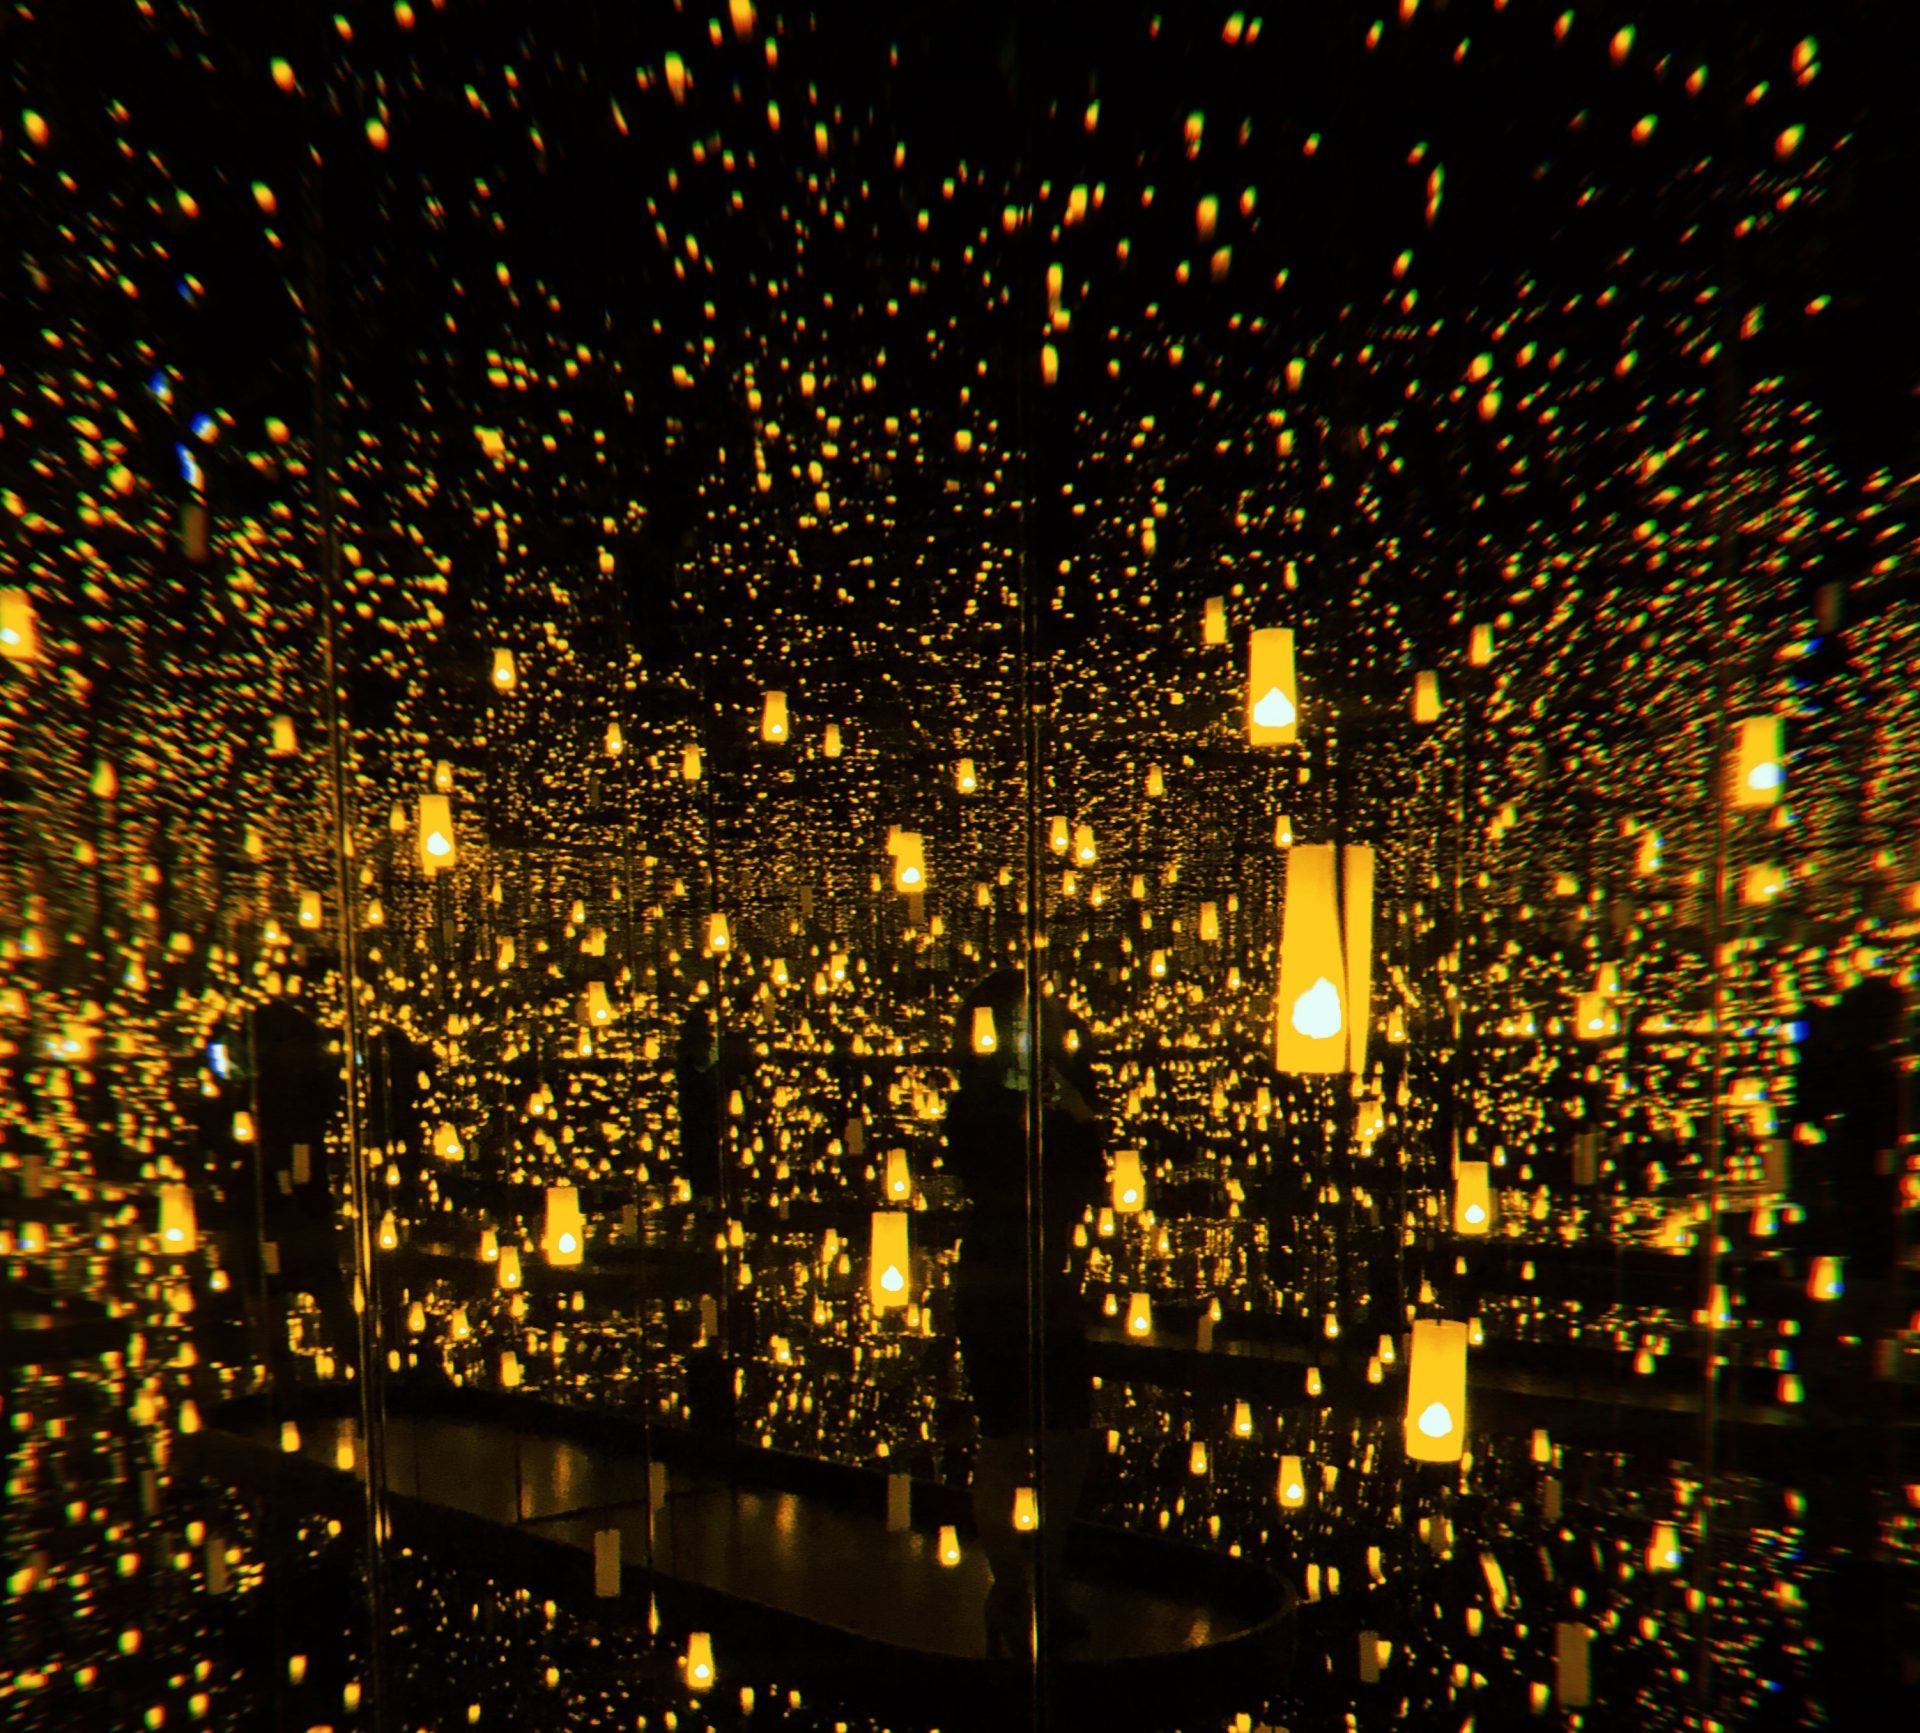 Yayoi Kusama lights up the High Museum of Art with new exhibit